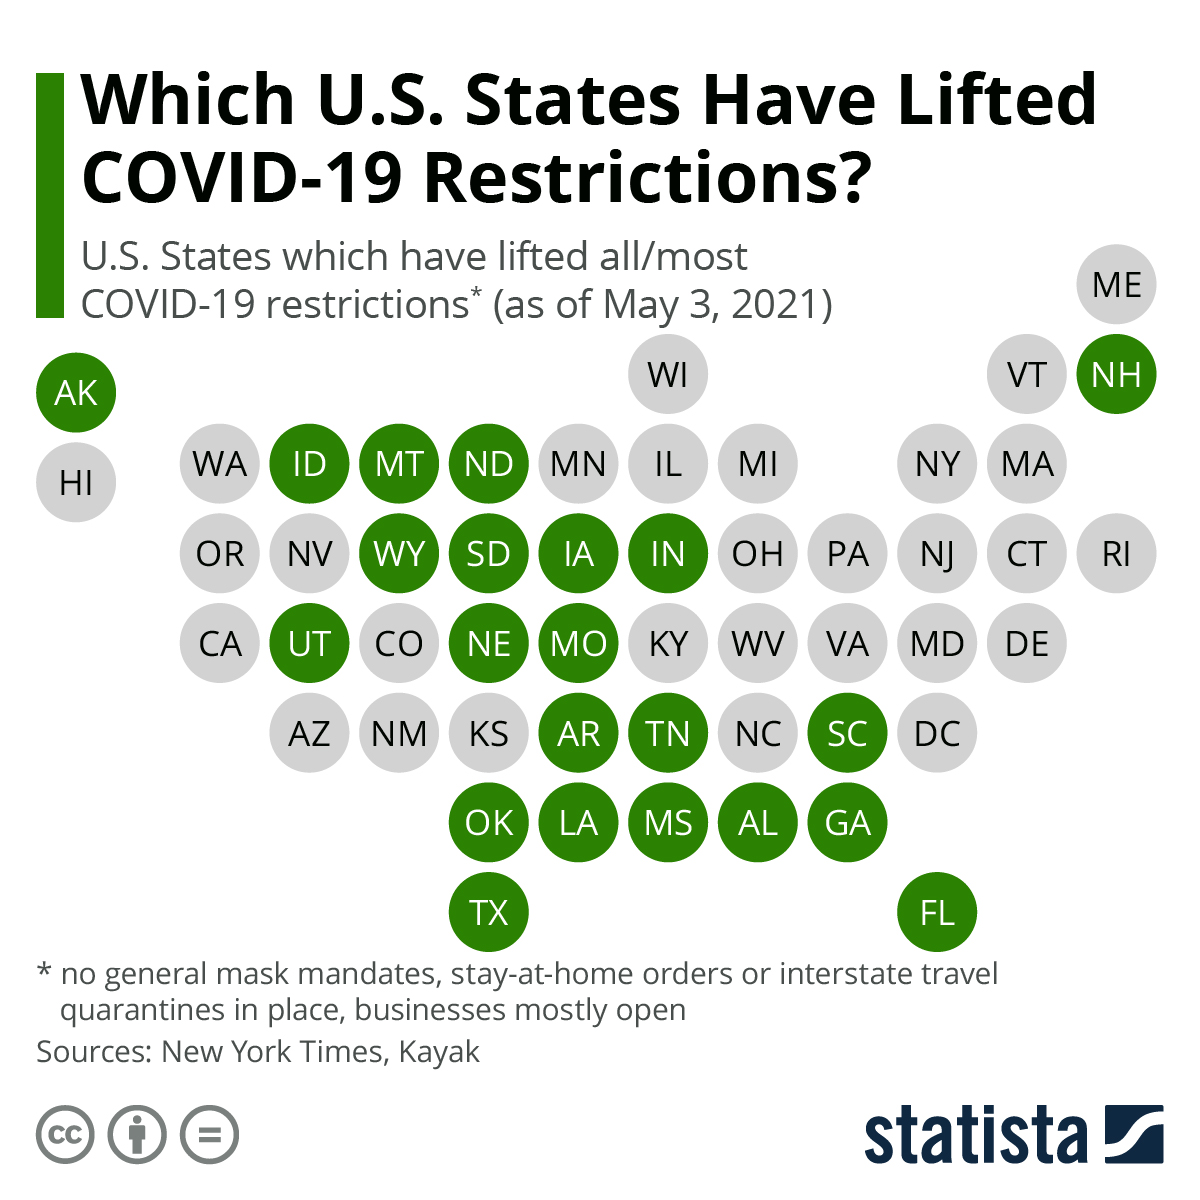 Which U.S. States Have Lifted COVID-19 Restrictions?